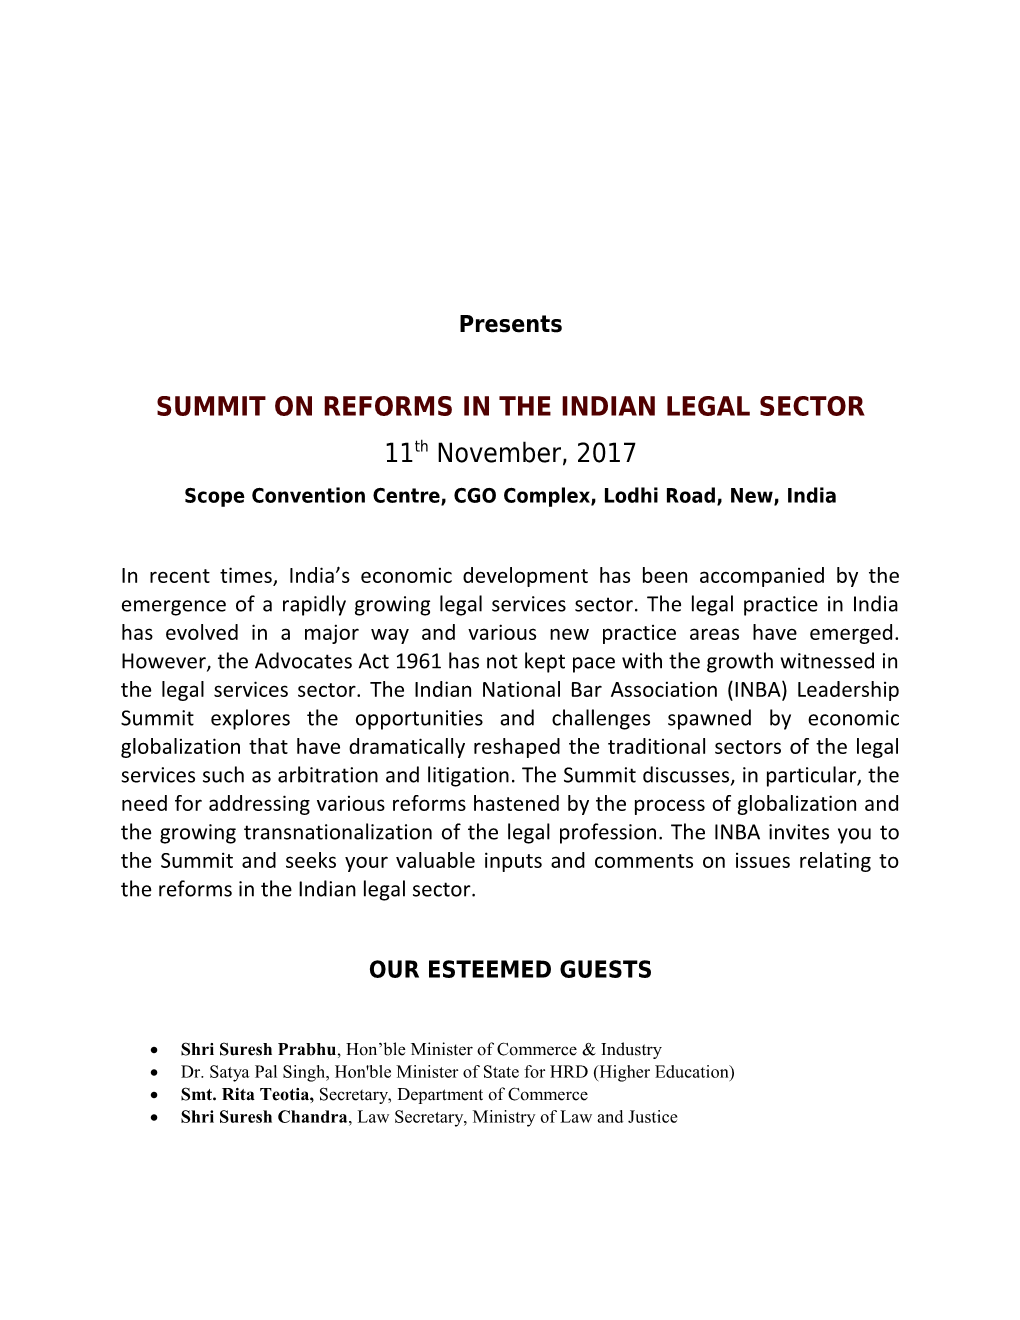 Summit on Reforms in the Indian Legal Sector